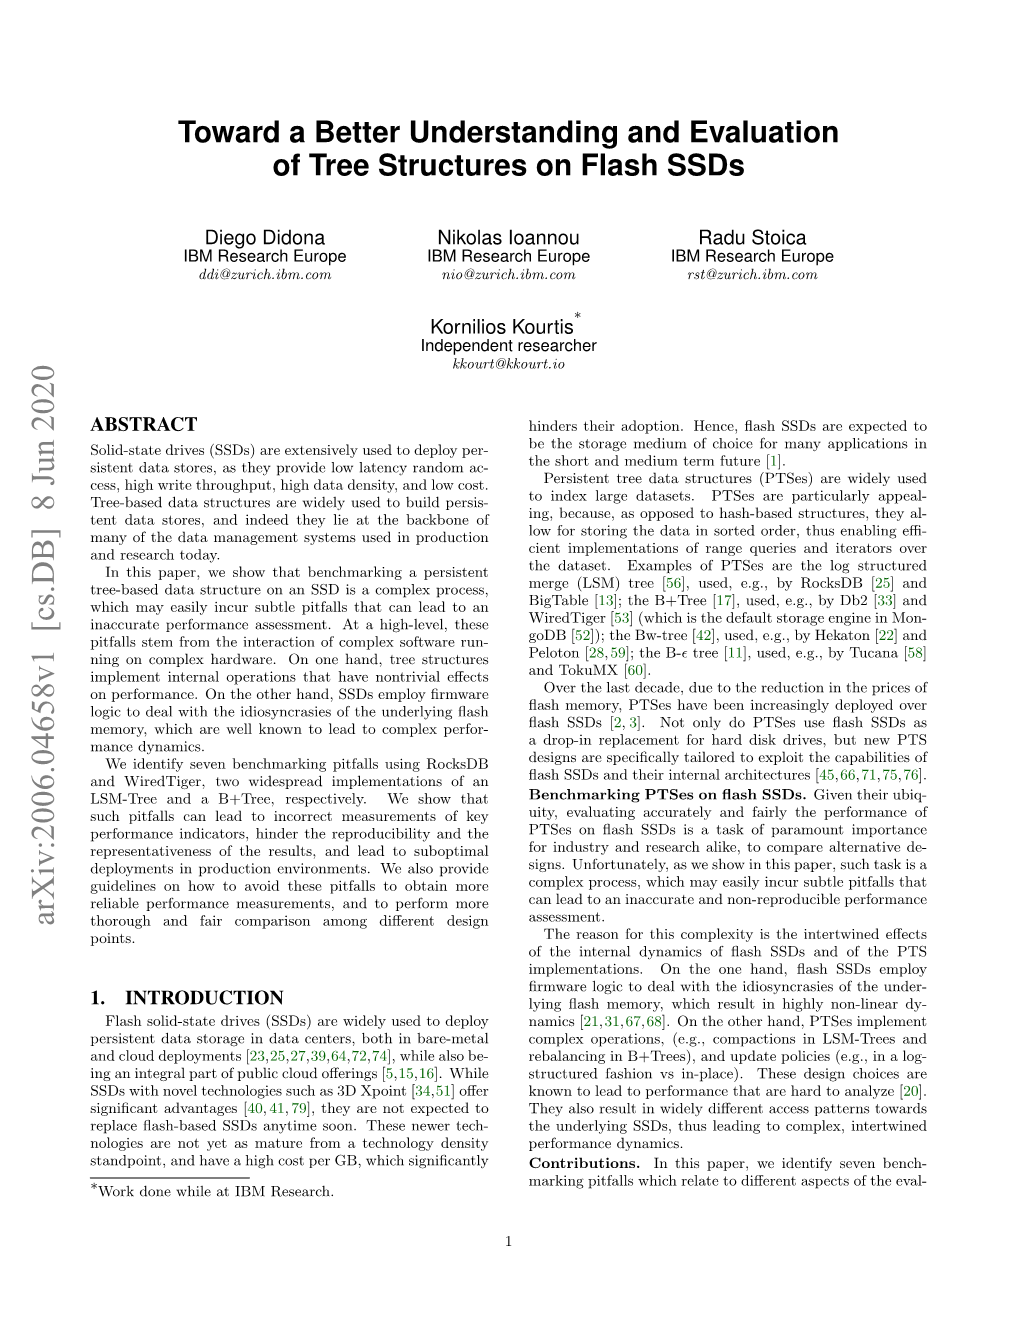 Toward a Better Understanding and Evaluation of Tree Structures on Flash Ssds